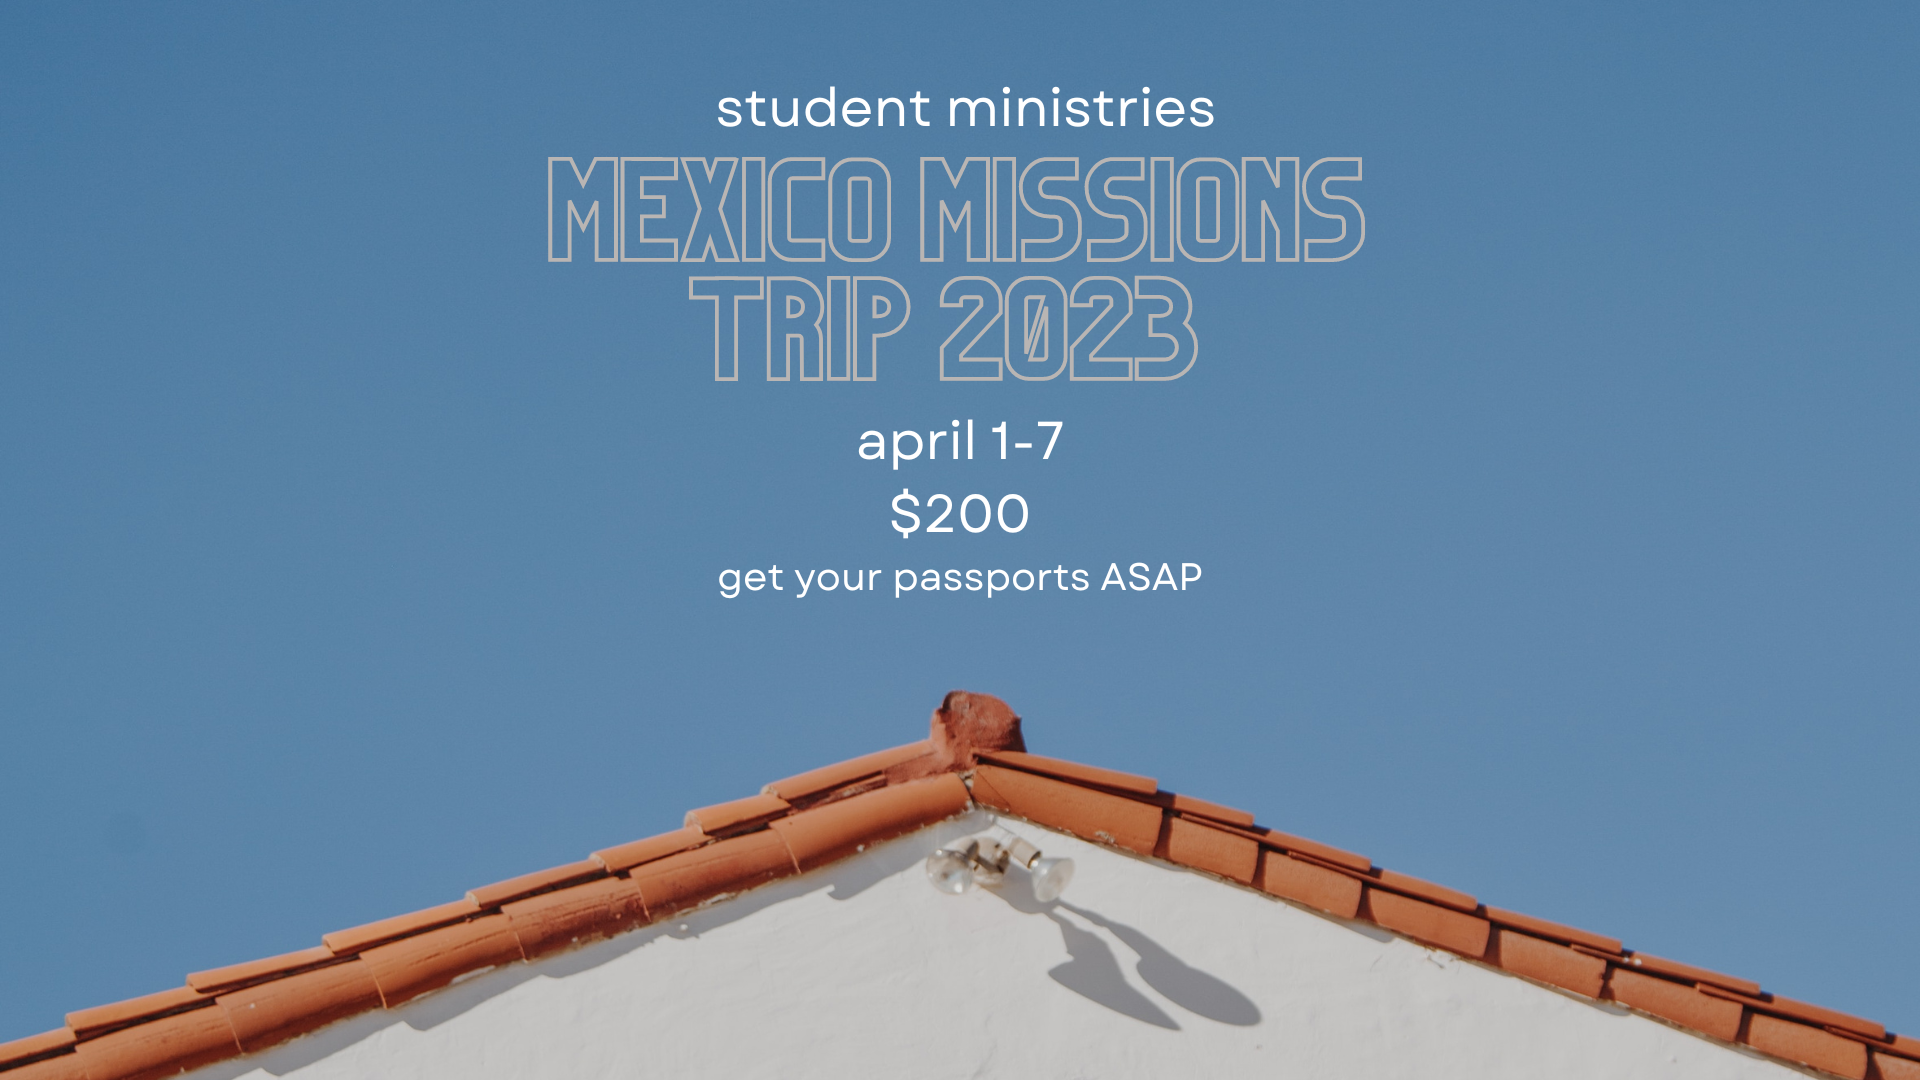 mexico missions trip 2023  image